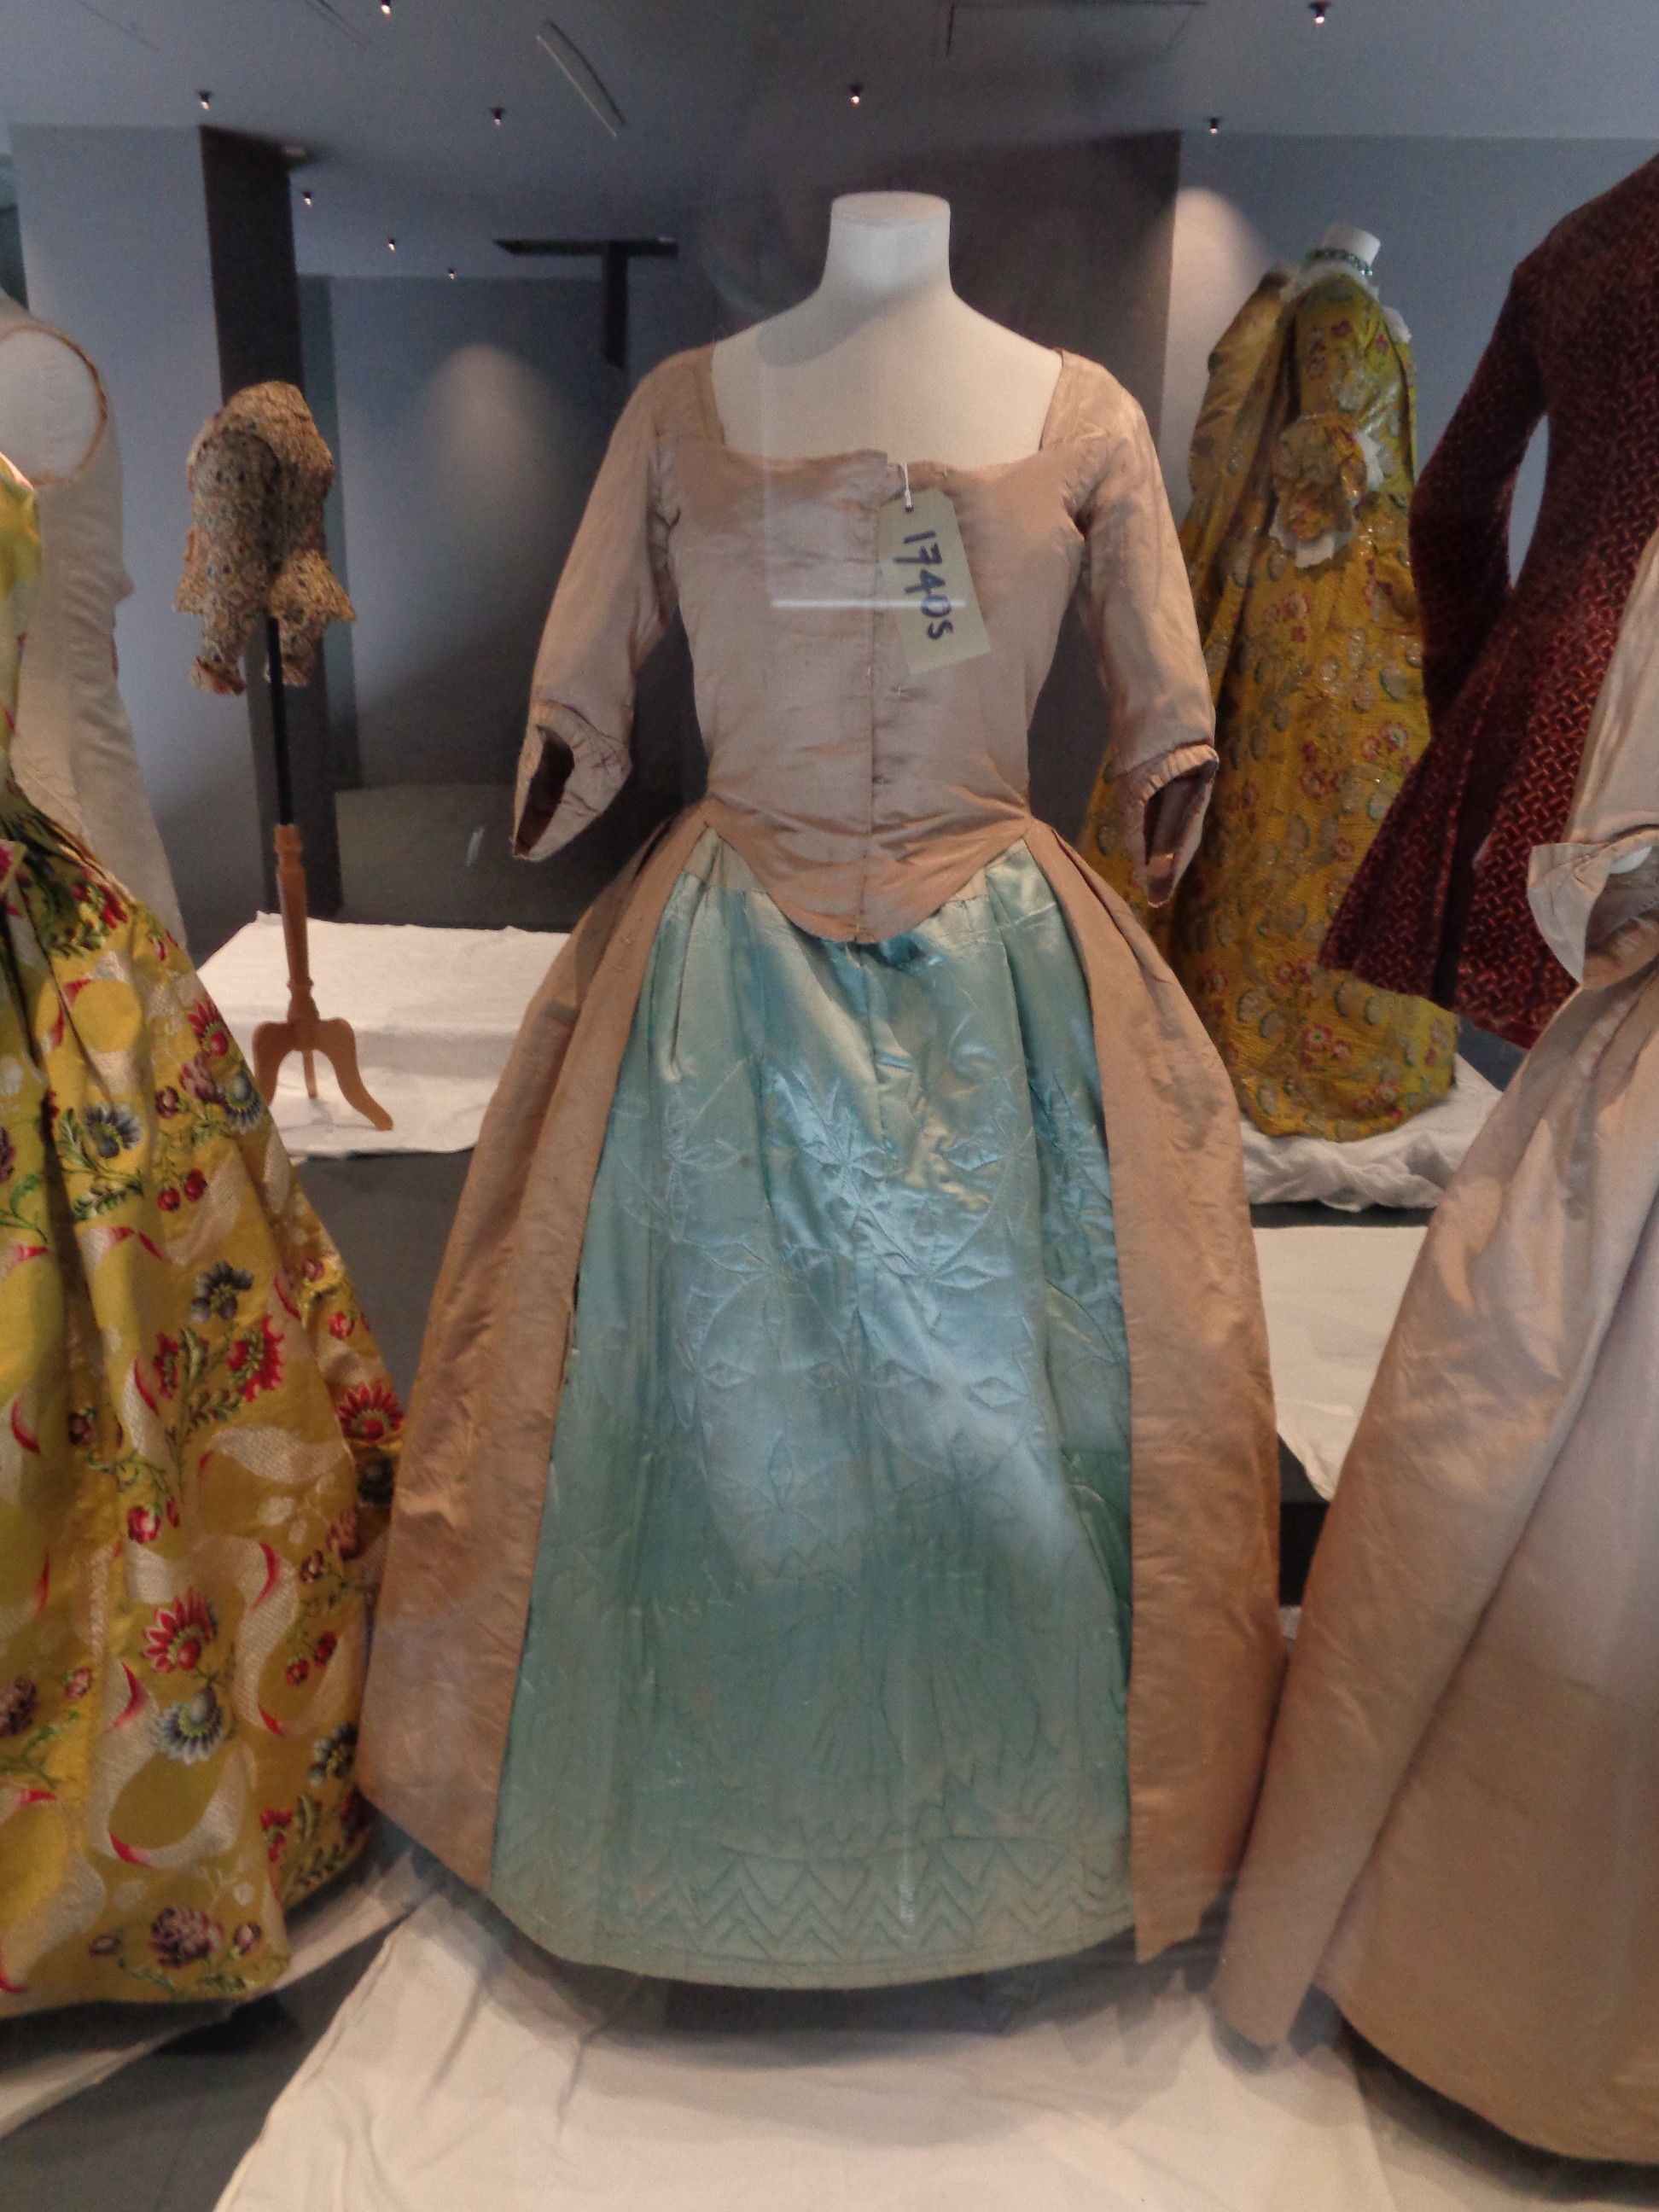 1740s fashion for women, specific dresses from the 1740s, 1740s and 18th c dressmaker, where can I get a replicated gown made,